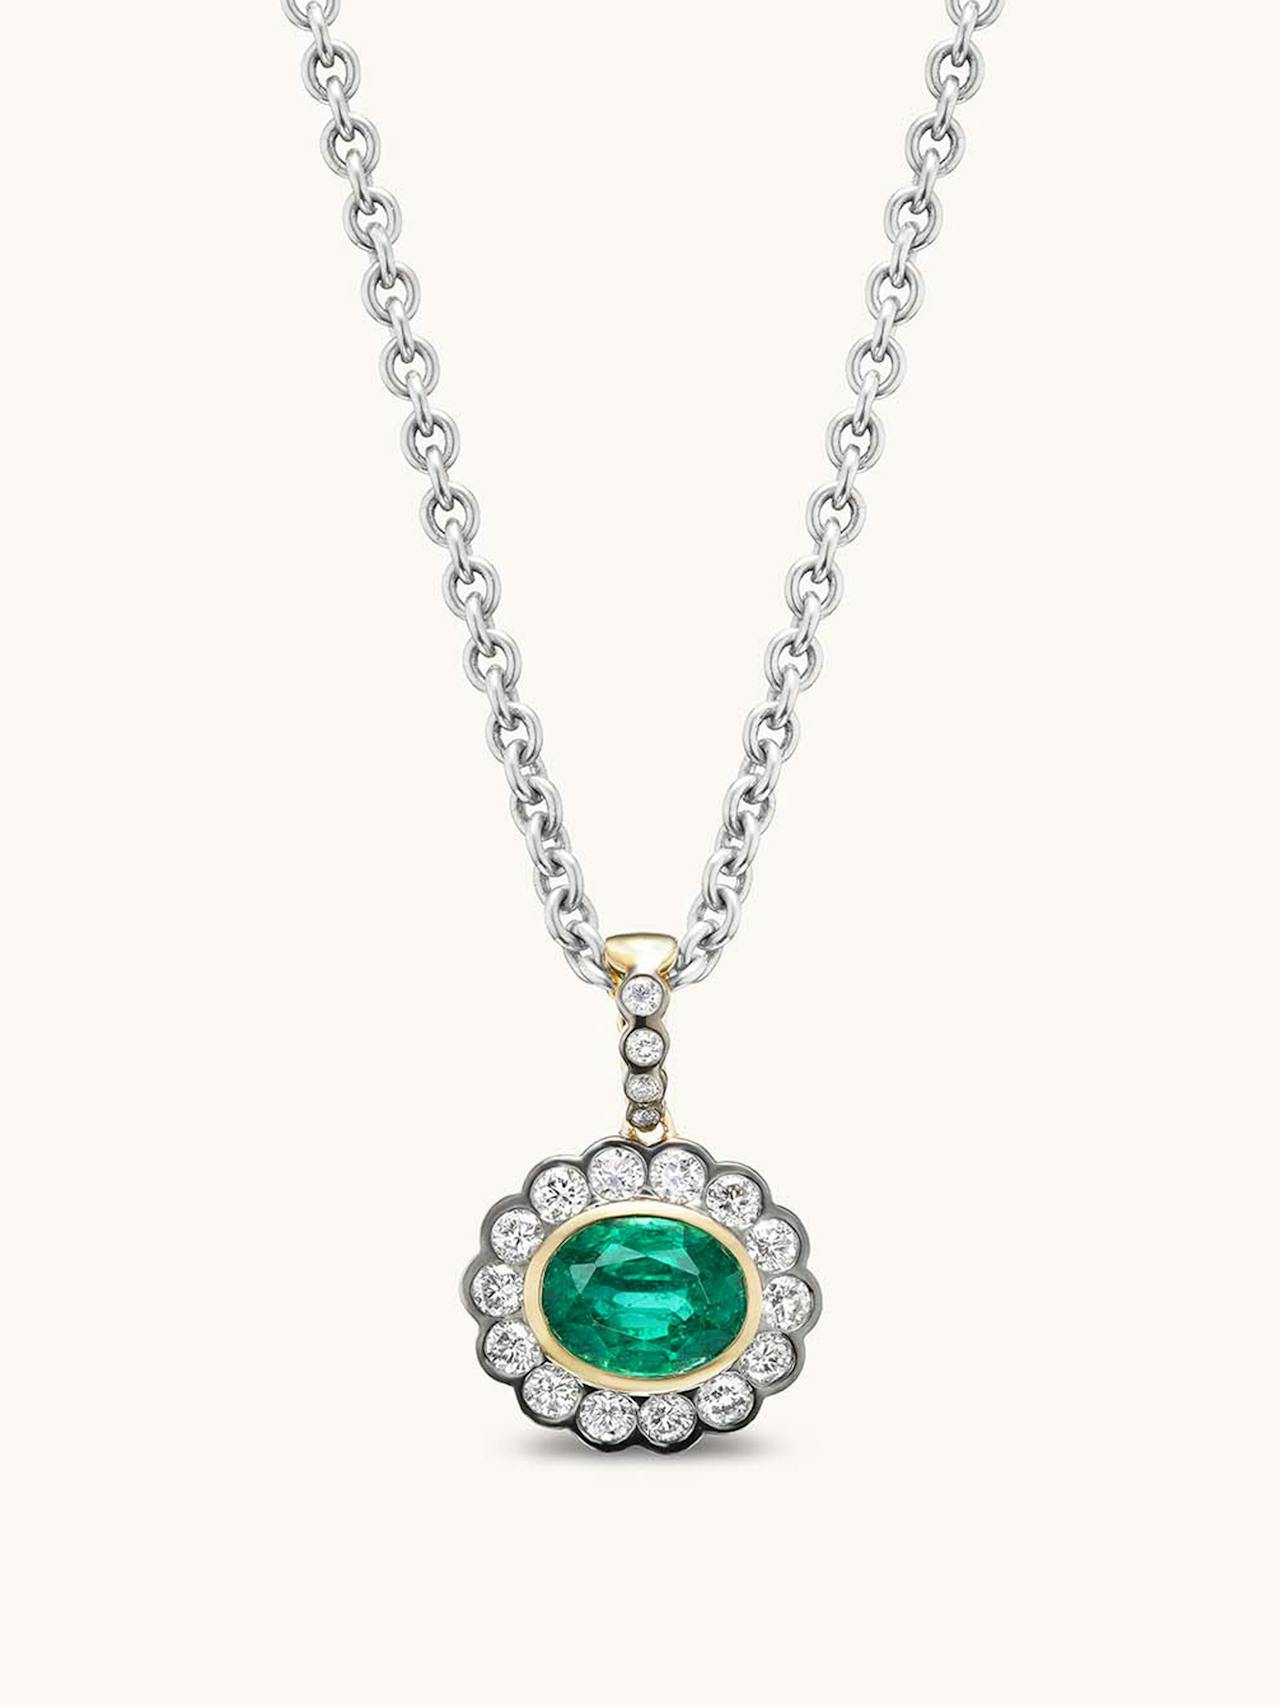 Alexandra charm necklace in emerald